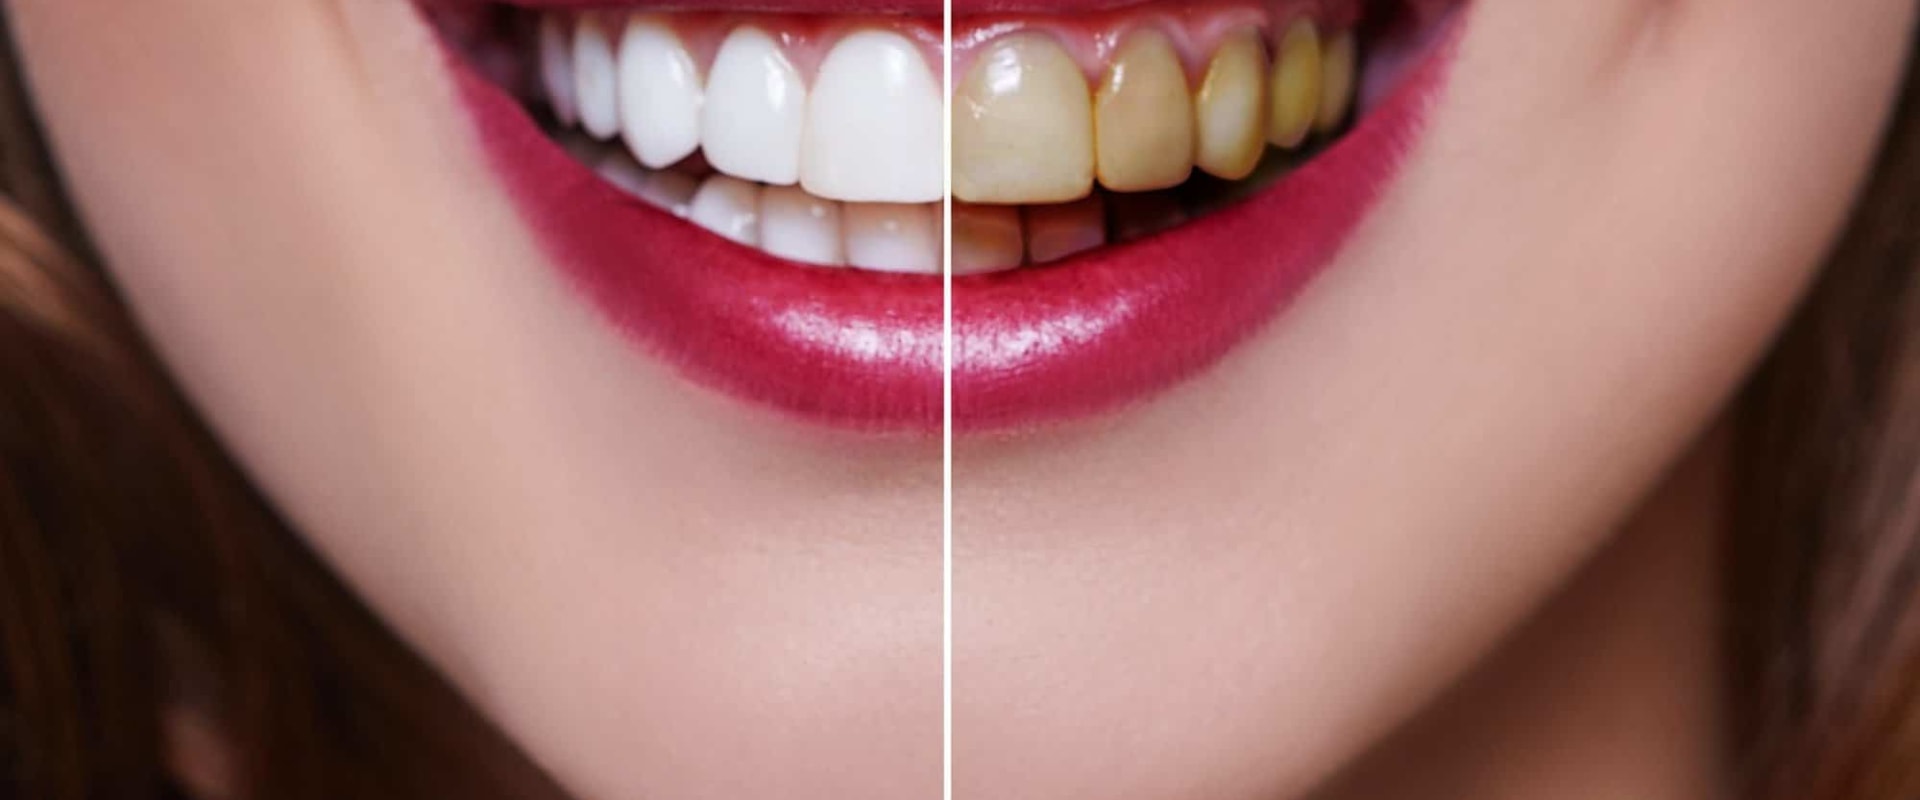 Zoom Whitening Results - What to Expect